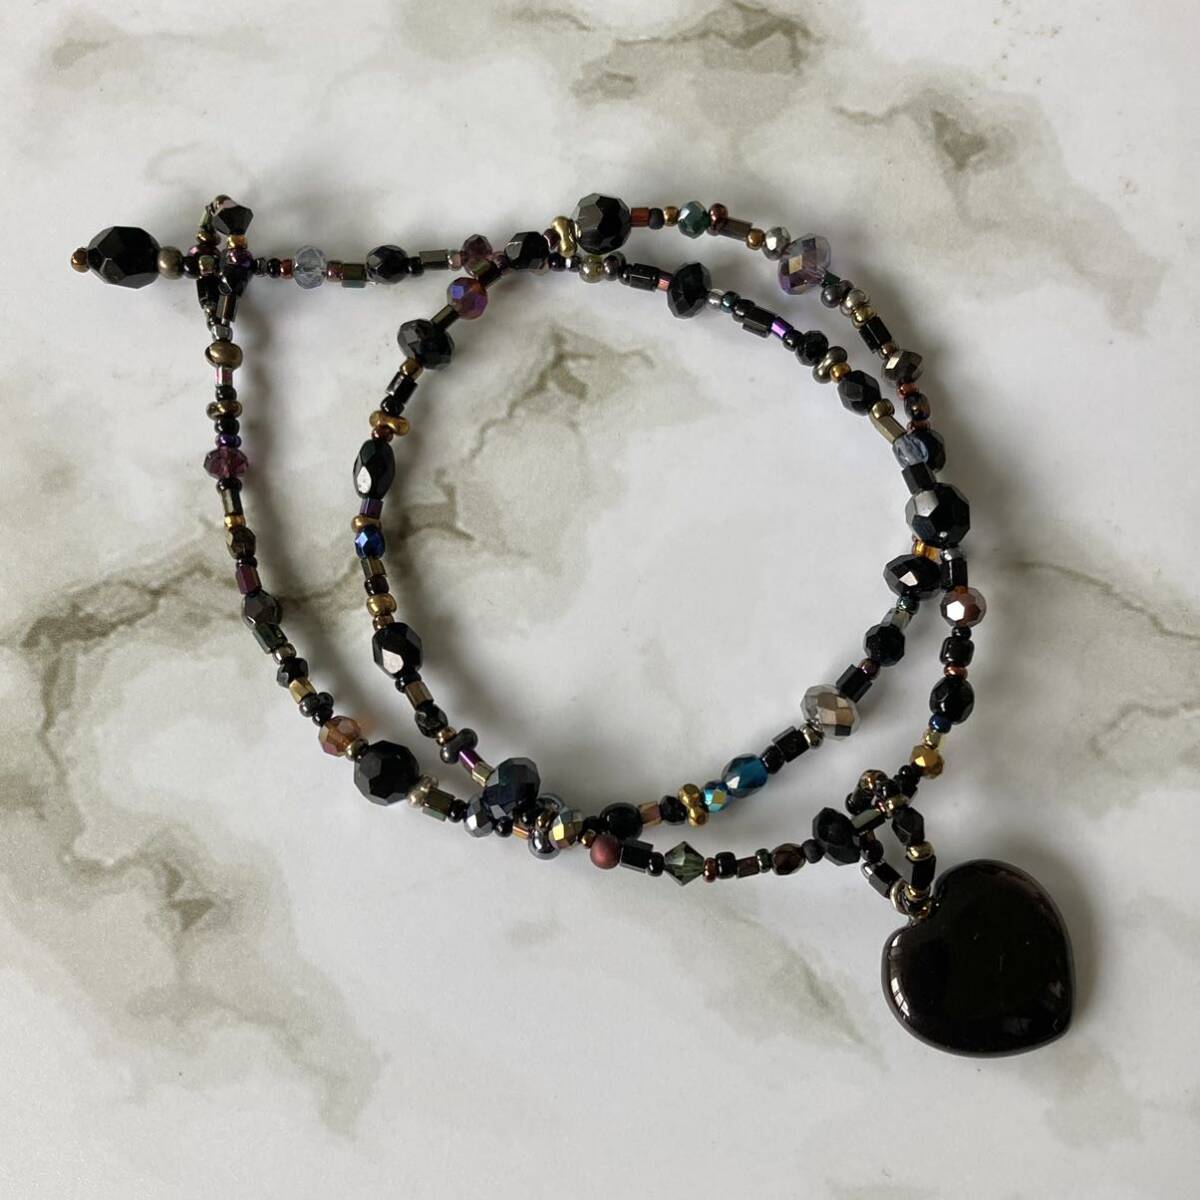 Beaded Necklace Handmade 2way Necklace with Black Heart Charm, Women's Accessories, necklace, pendant, beads, Glass